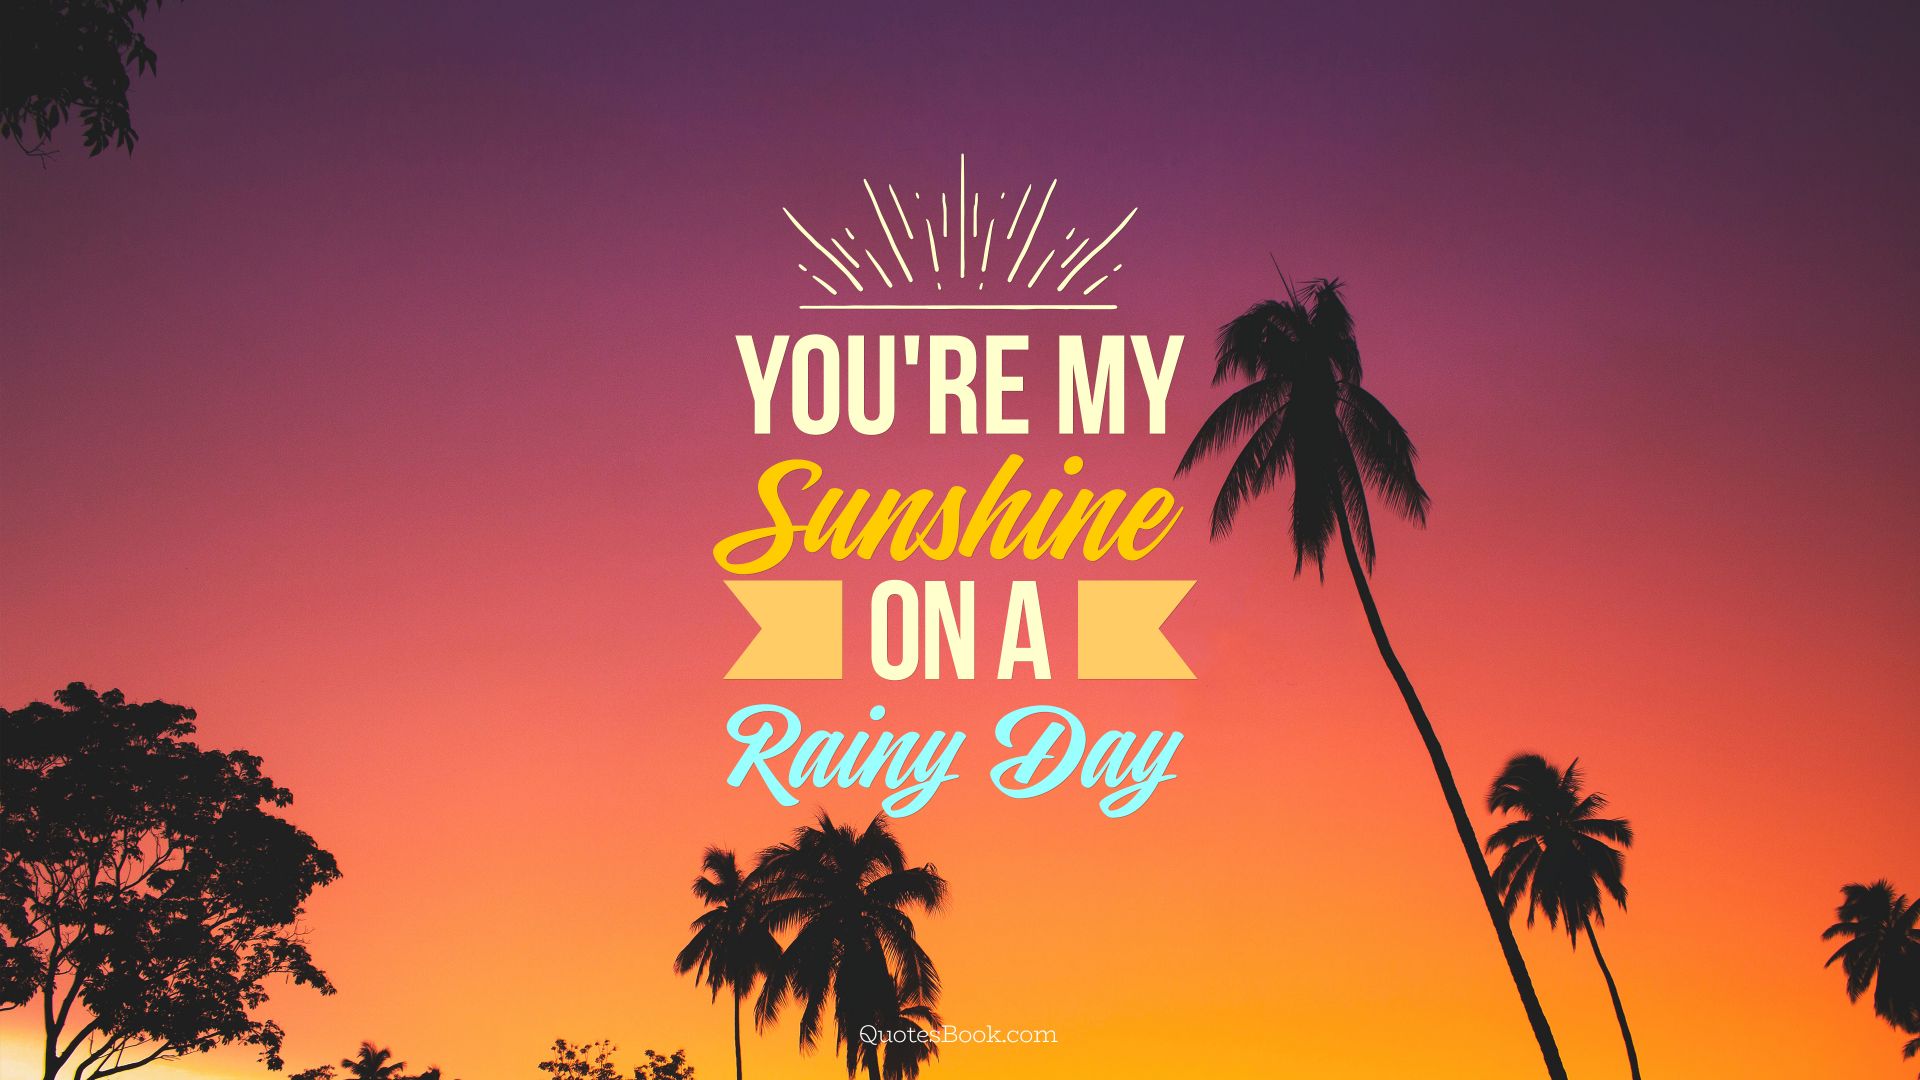 You're my sunshine on a rainy day - QuotesBook